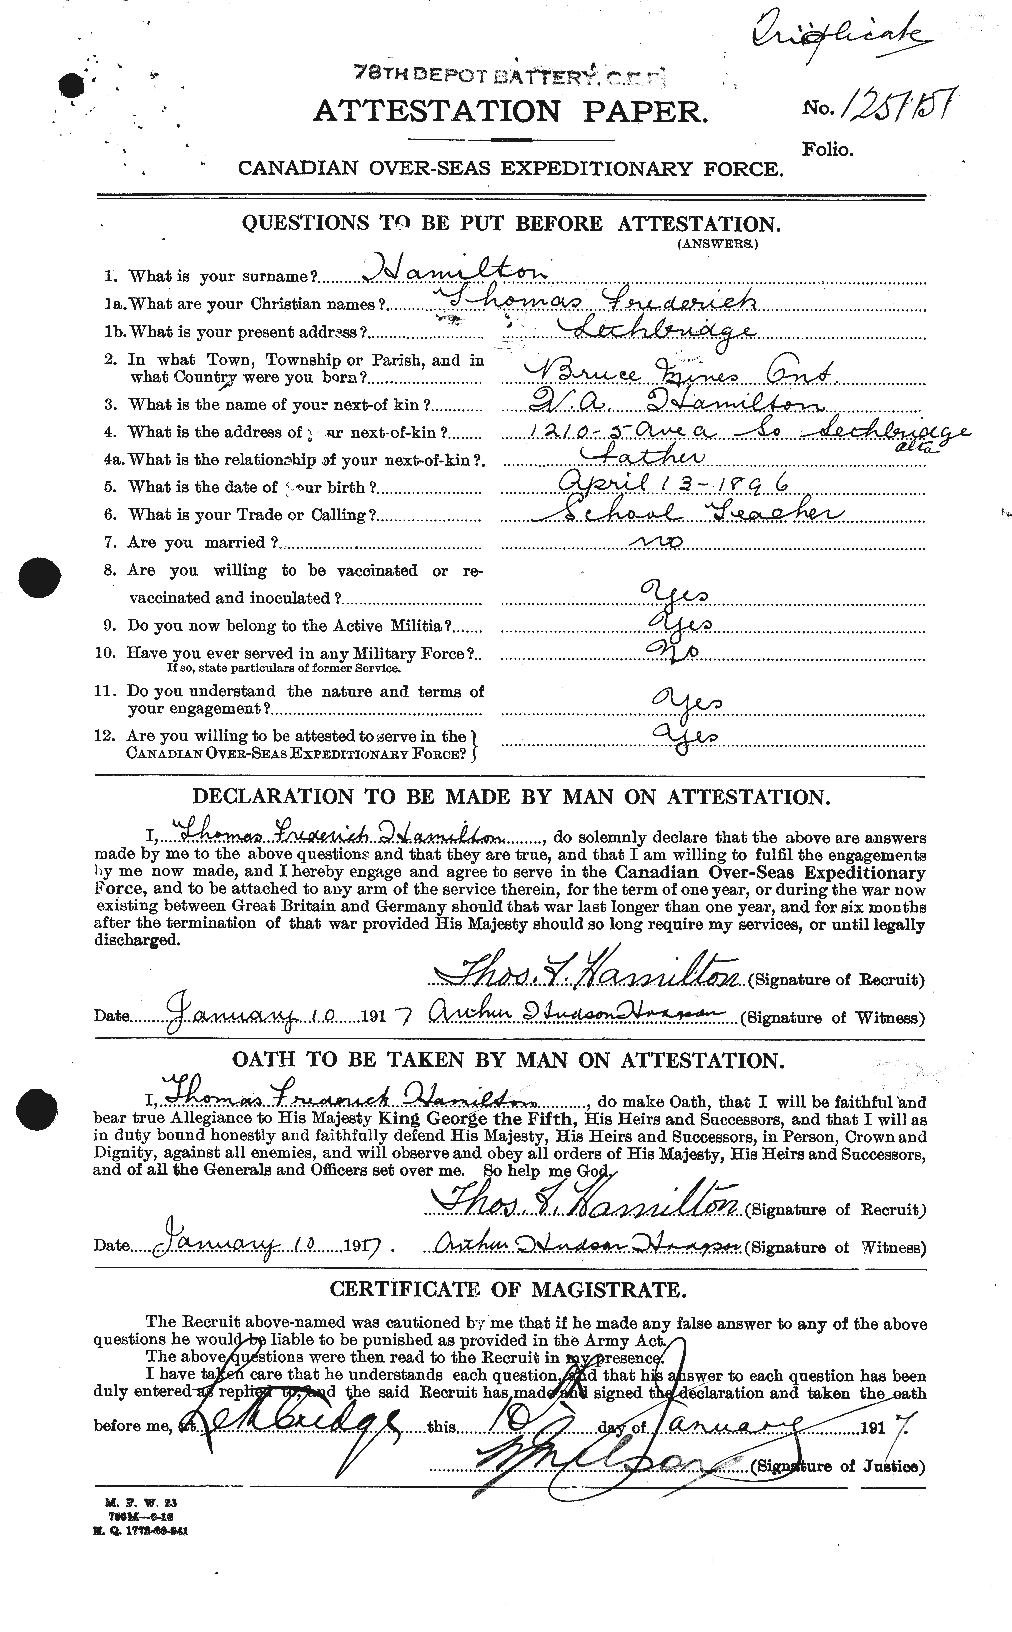 Personnel Records of the First World War - CEF 374795a